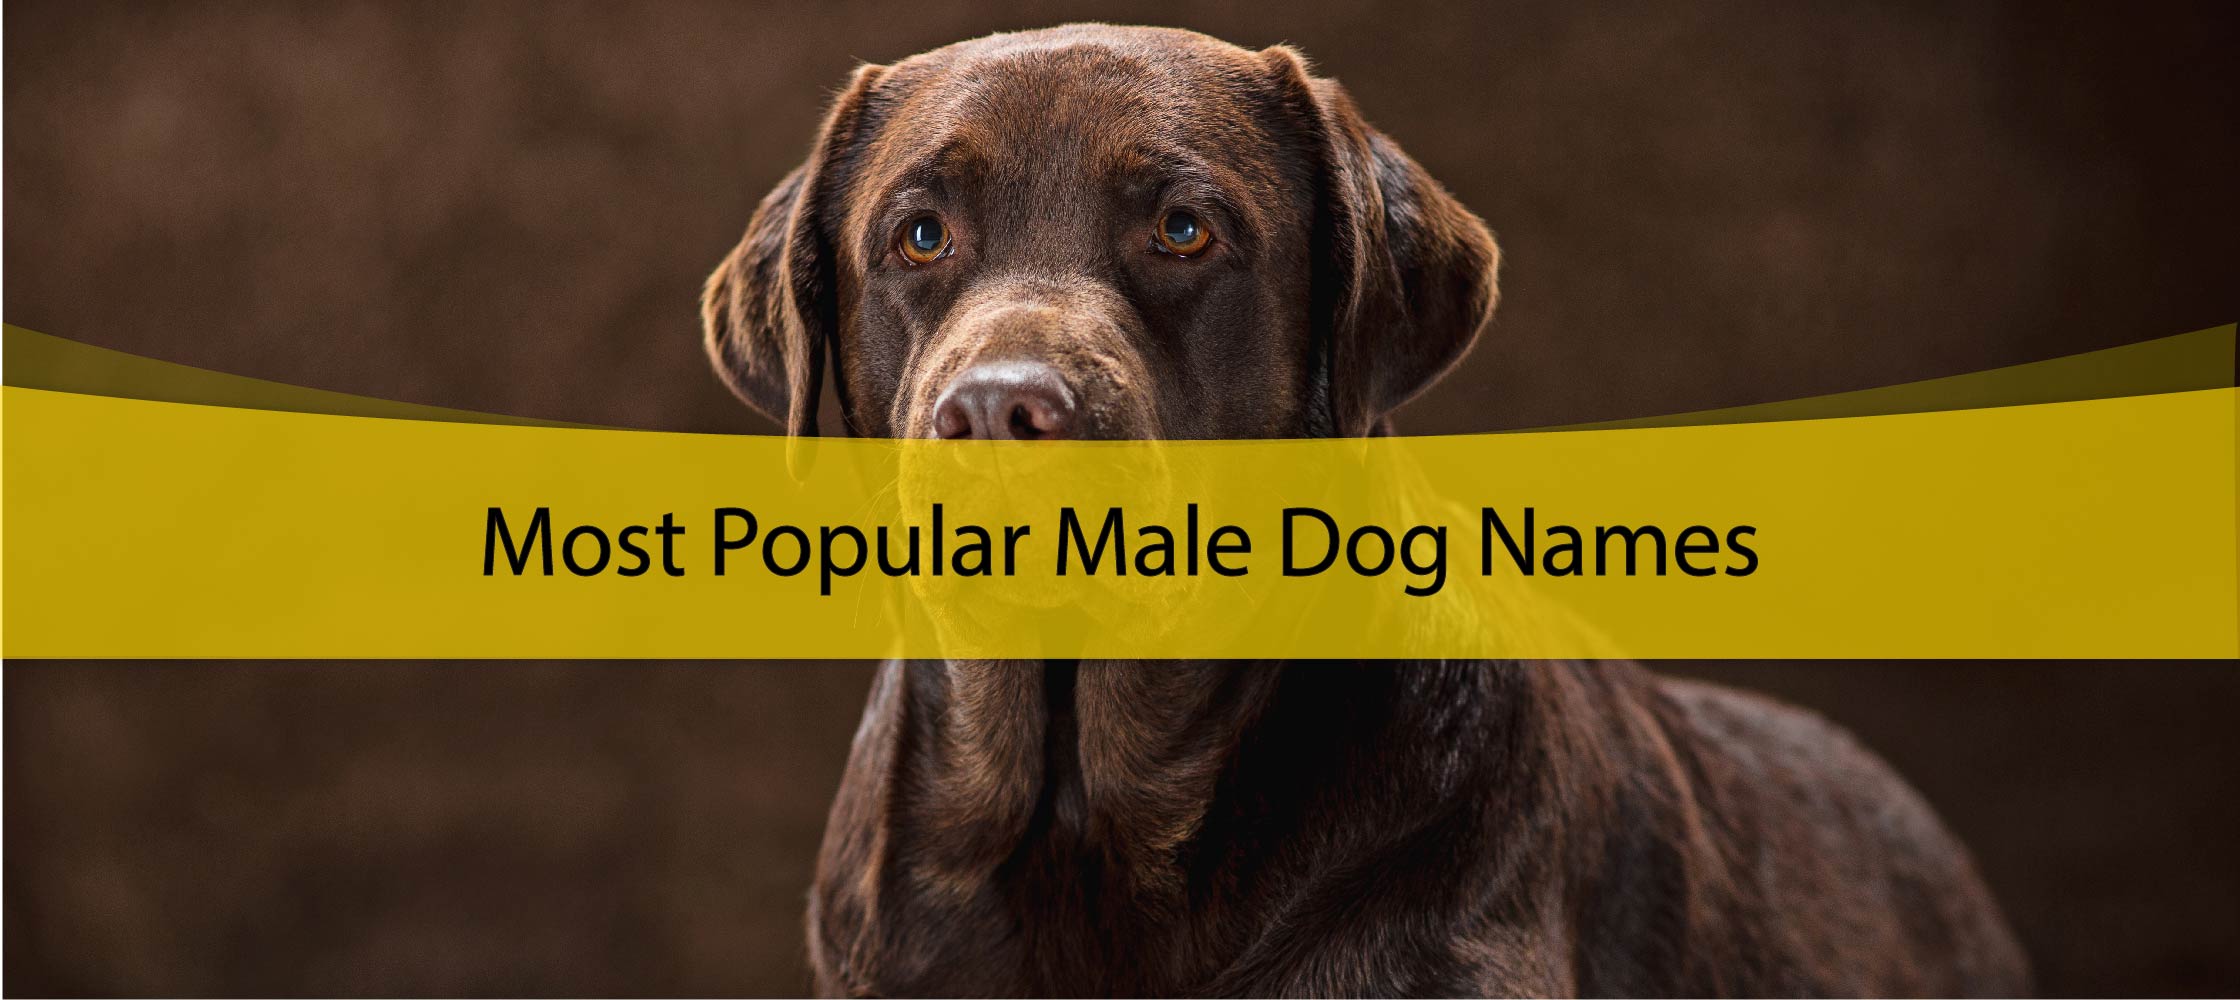 Most Popular Male Dog Names